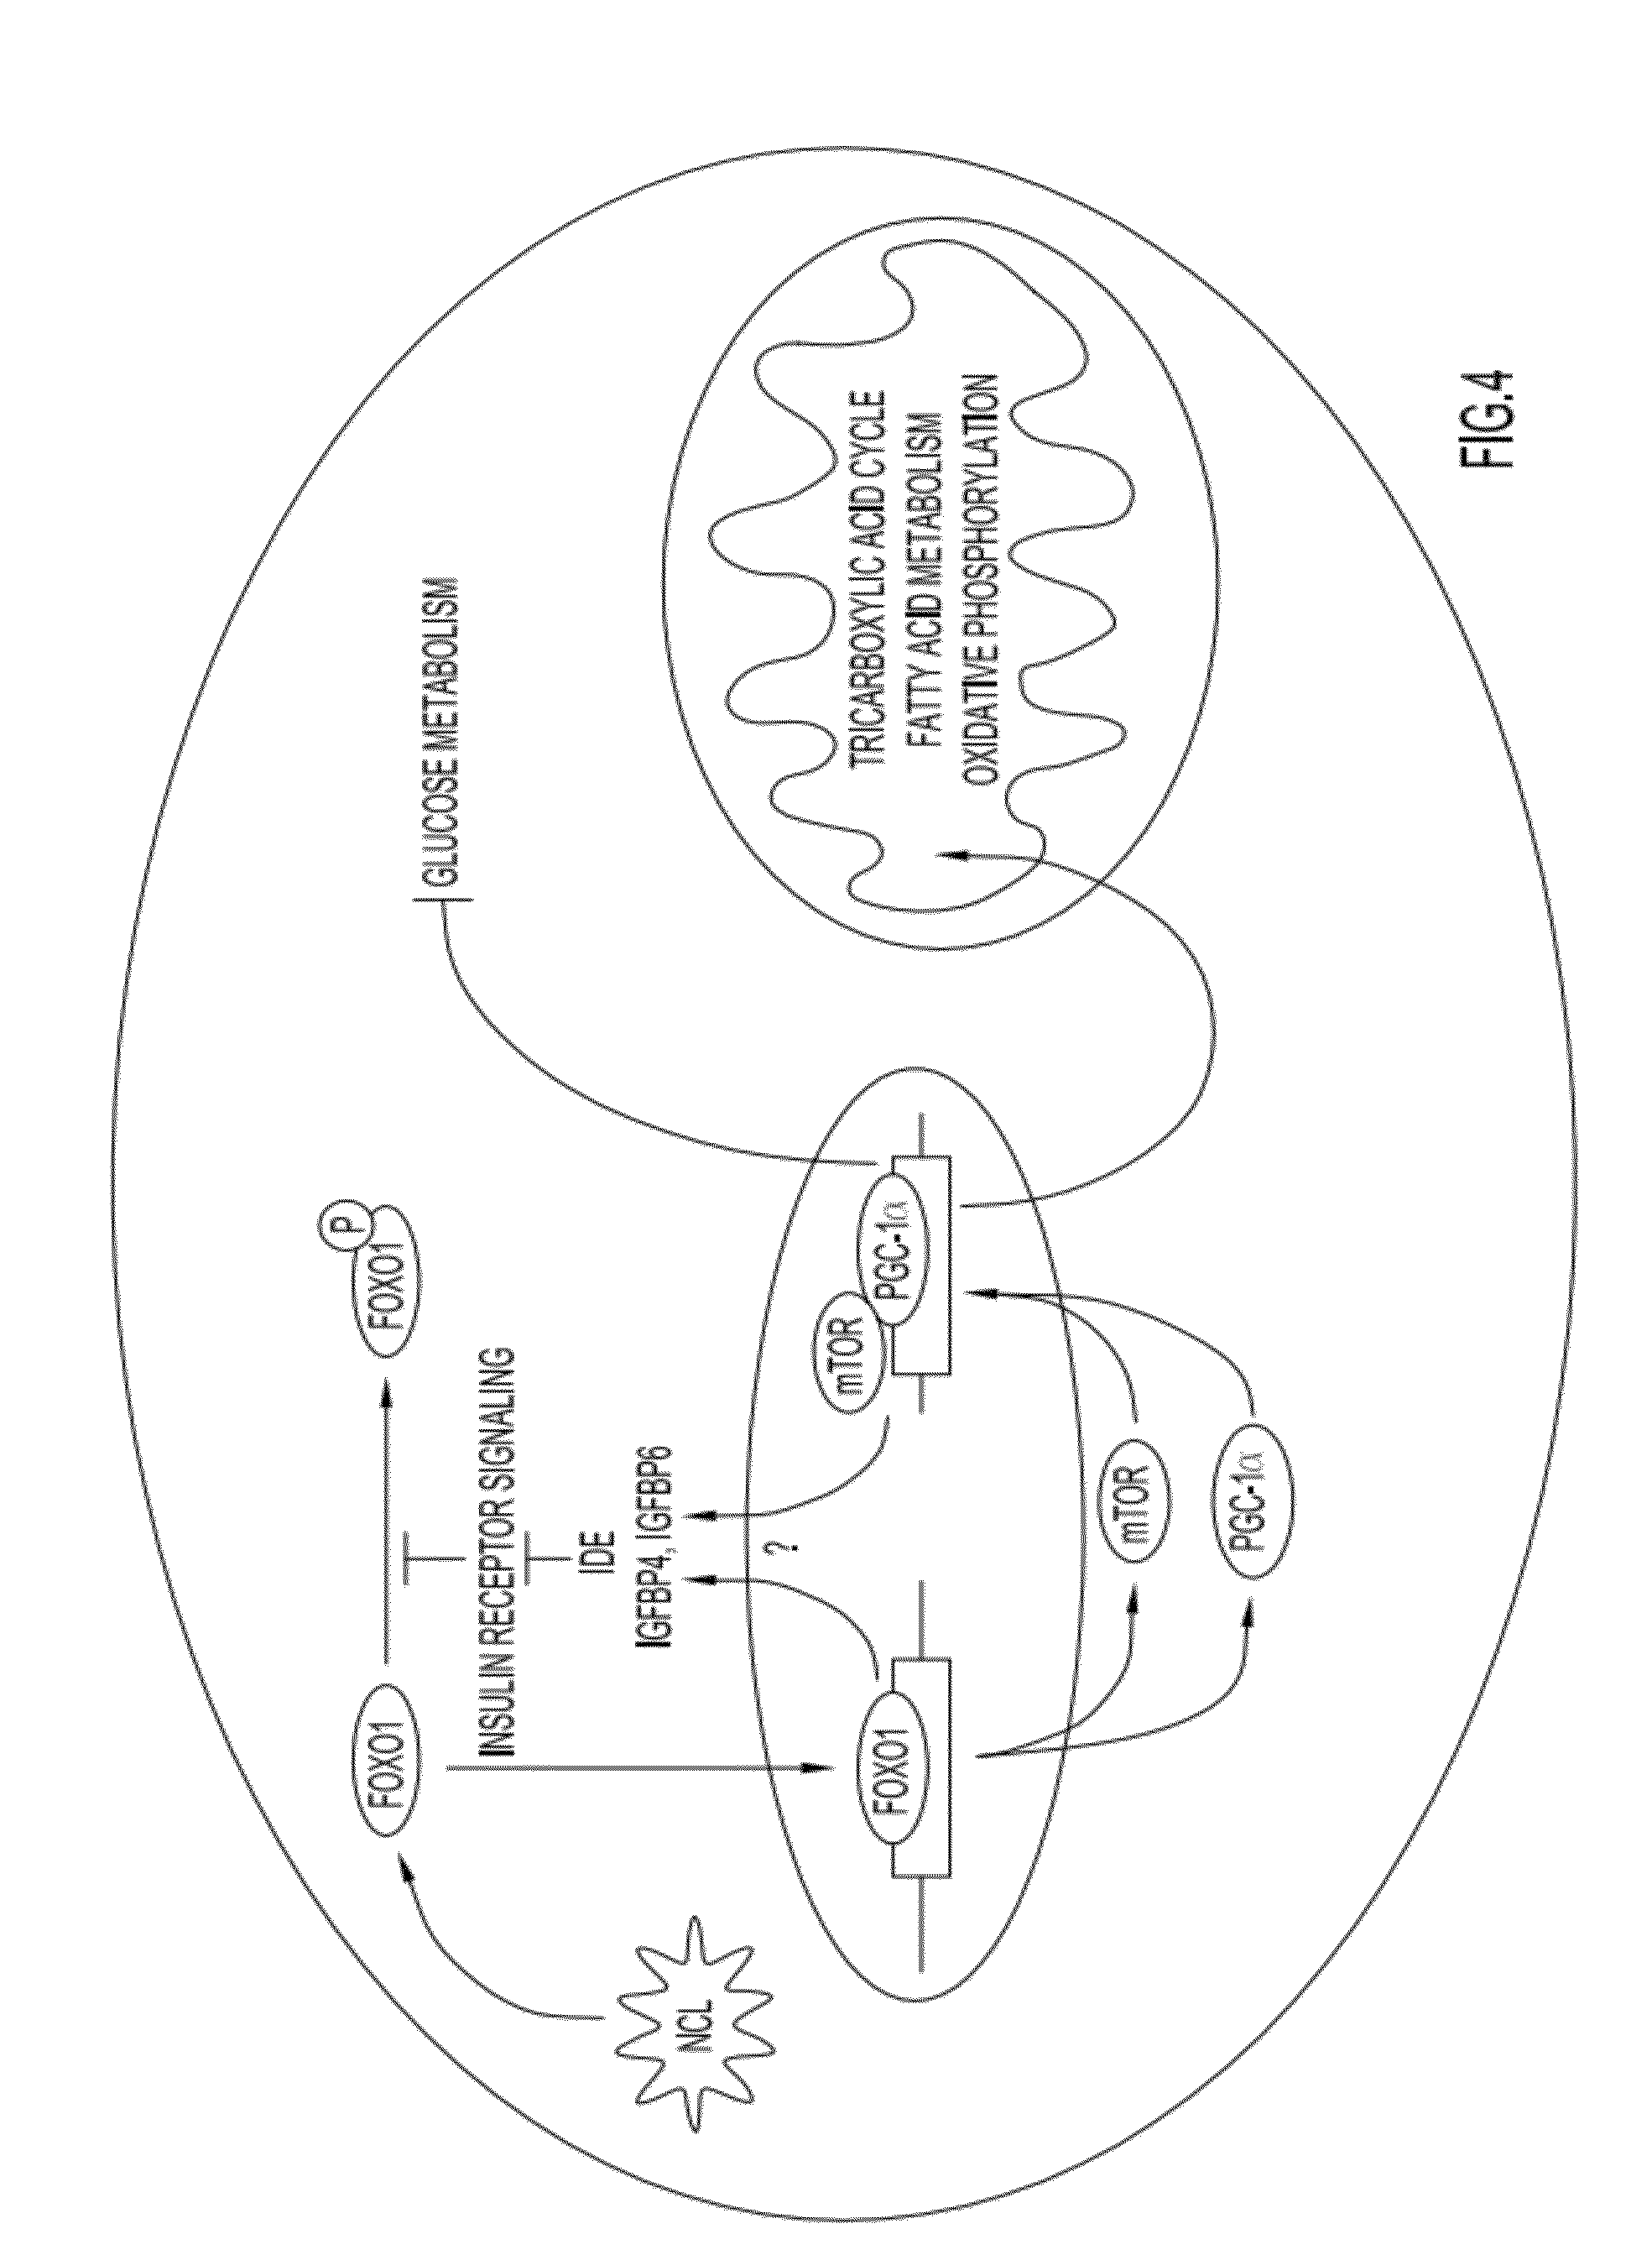 Resveratrol-Containing Compositions And Methods Of Use